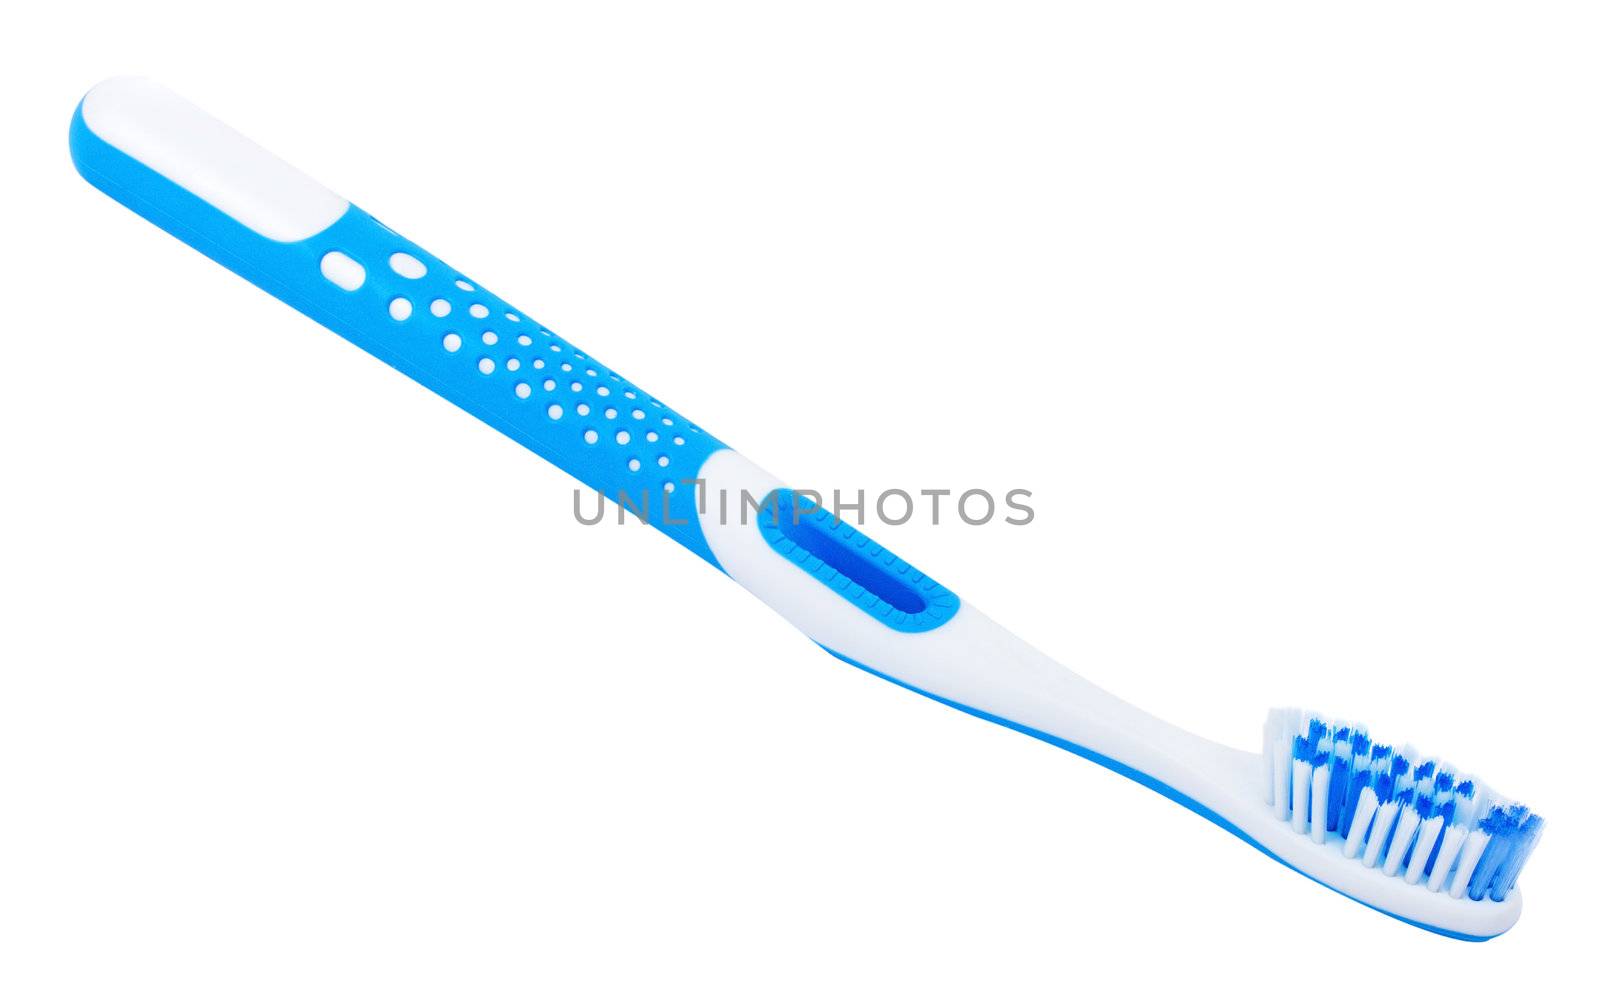 close-up blue tooth brush, isolated on white